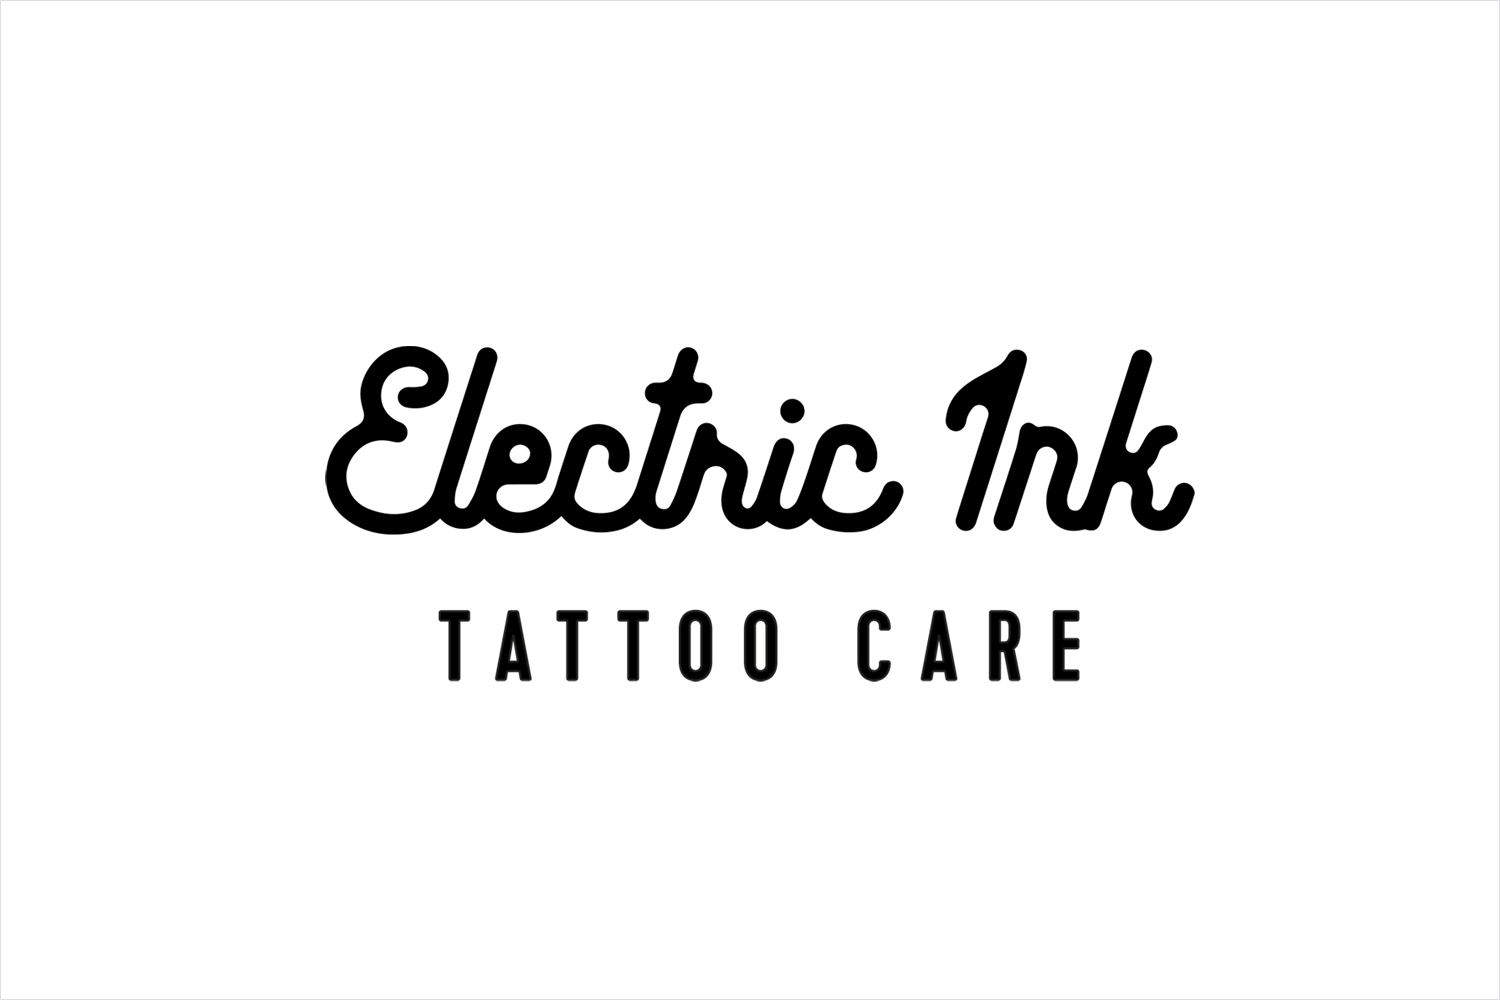 Creative Logotype Gallery & Inspiration: Electric Ink by Robot Food, United Kingdom